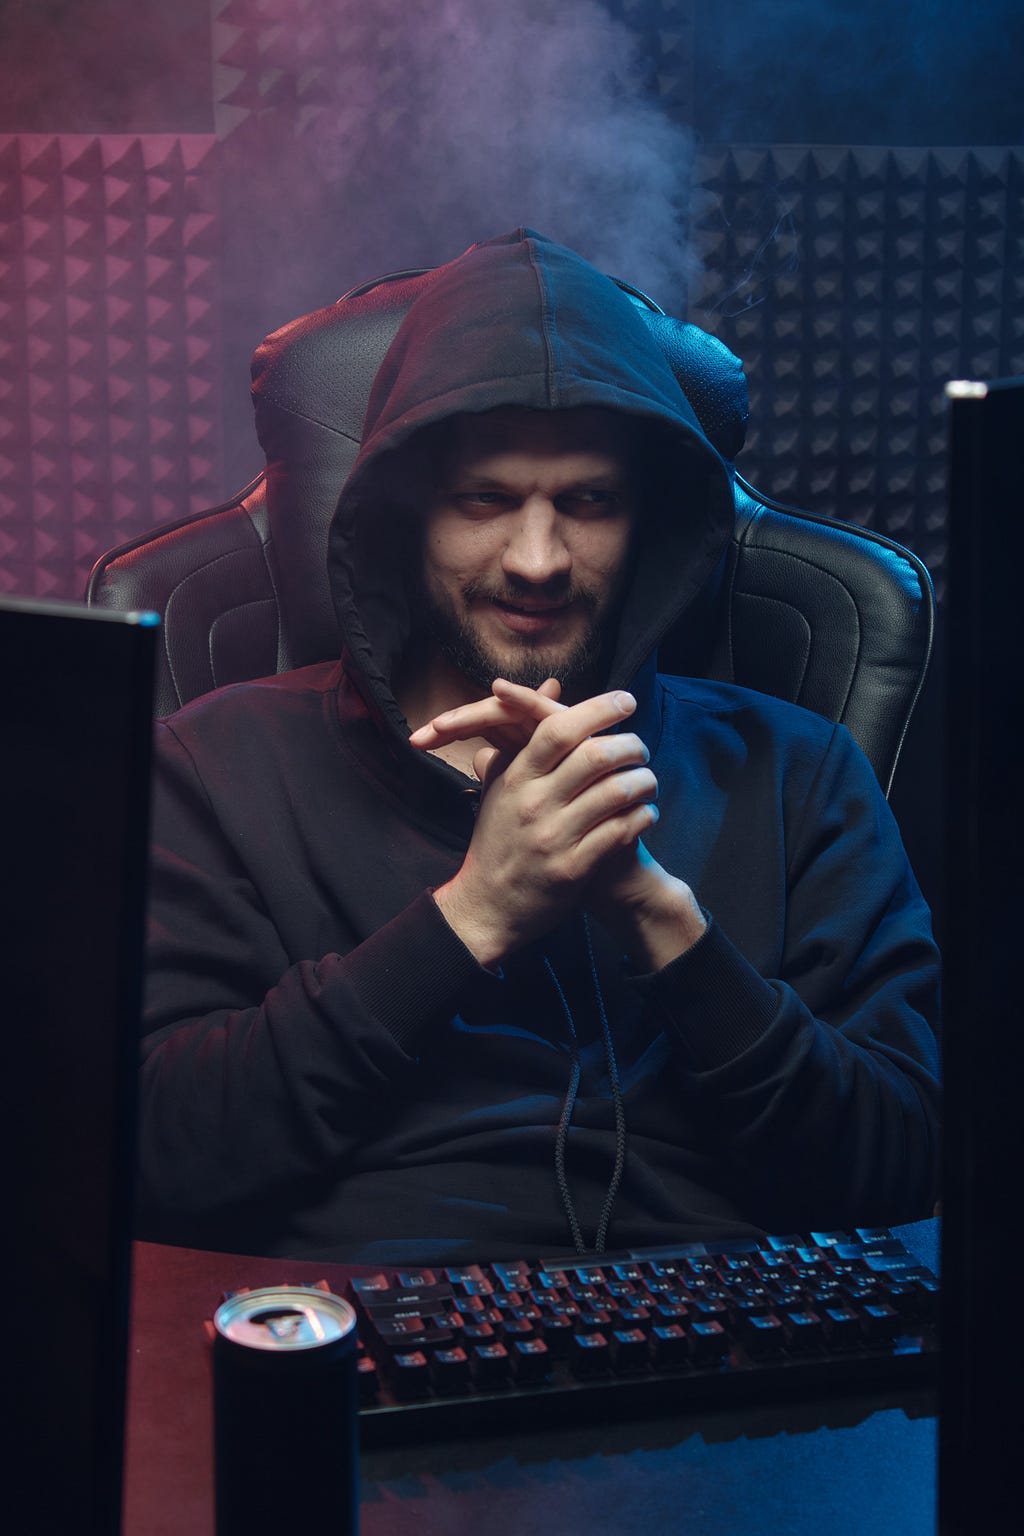 A young man in a hooded sweatshirt sits at a desk in a high-back swivel chair facing the viewer, and a computer off to one side. The room is poorly lit with eerie light, and the young man looks like he’s scheming some dastardly deed.